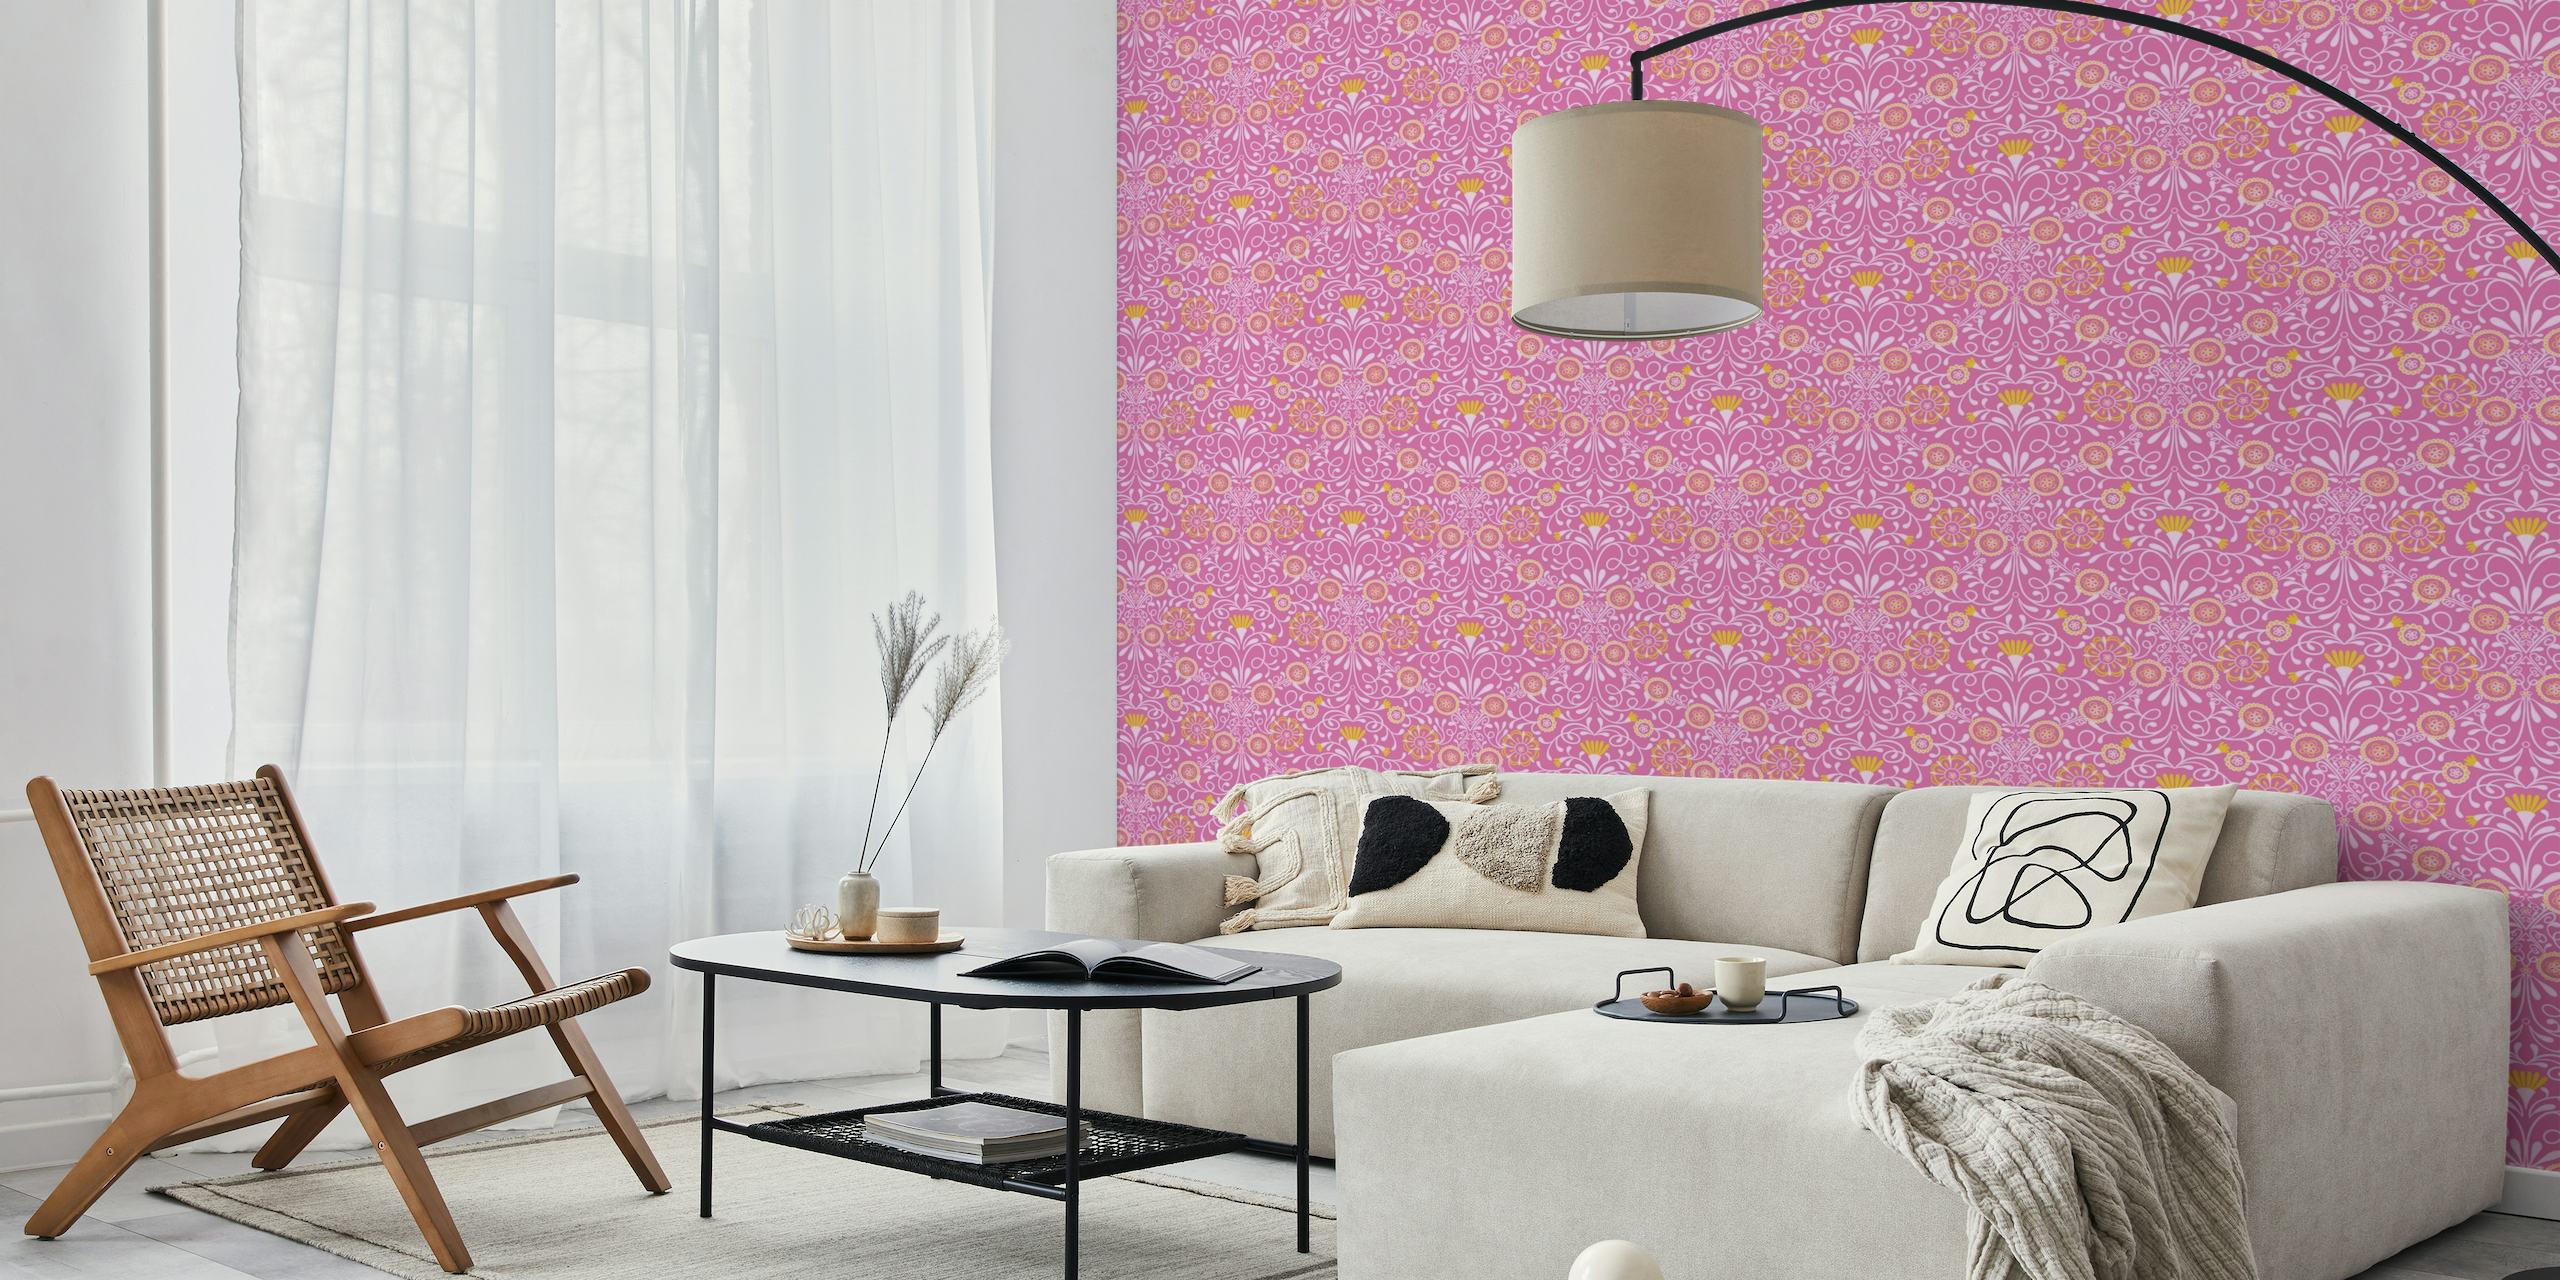 Tuscan Tile in Pink and Yellow papel de parede